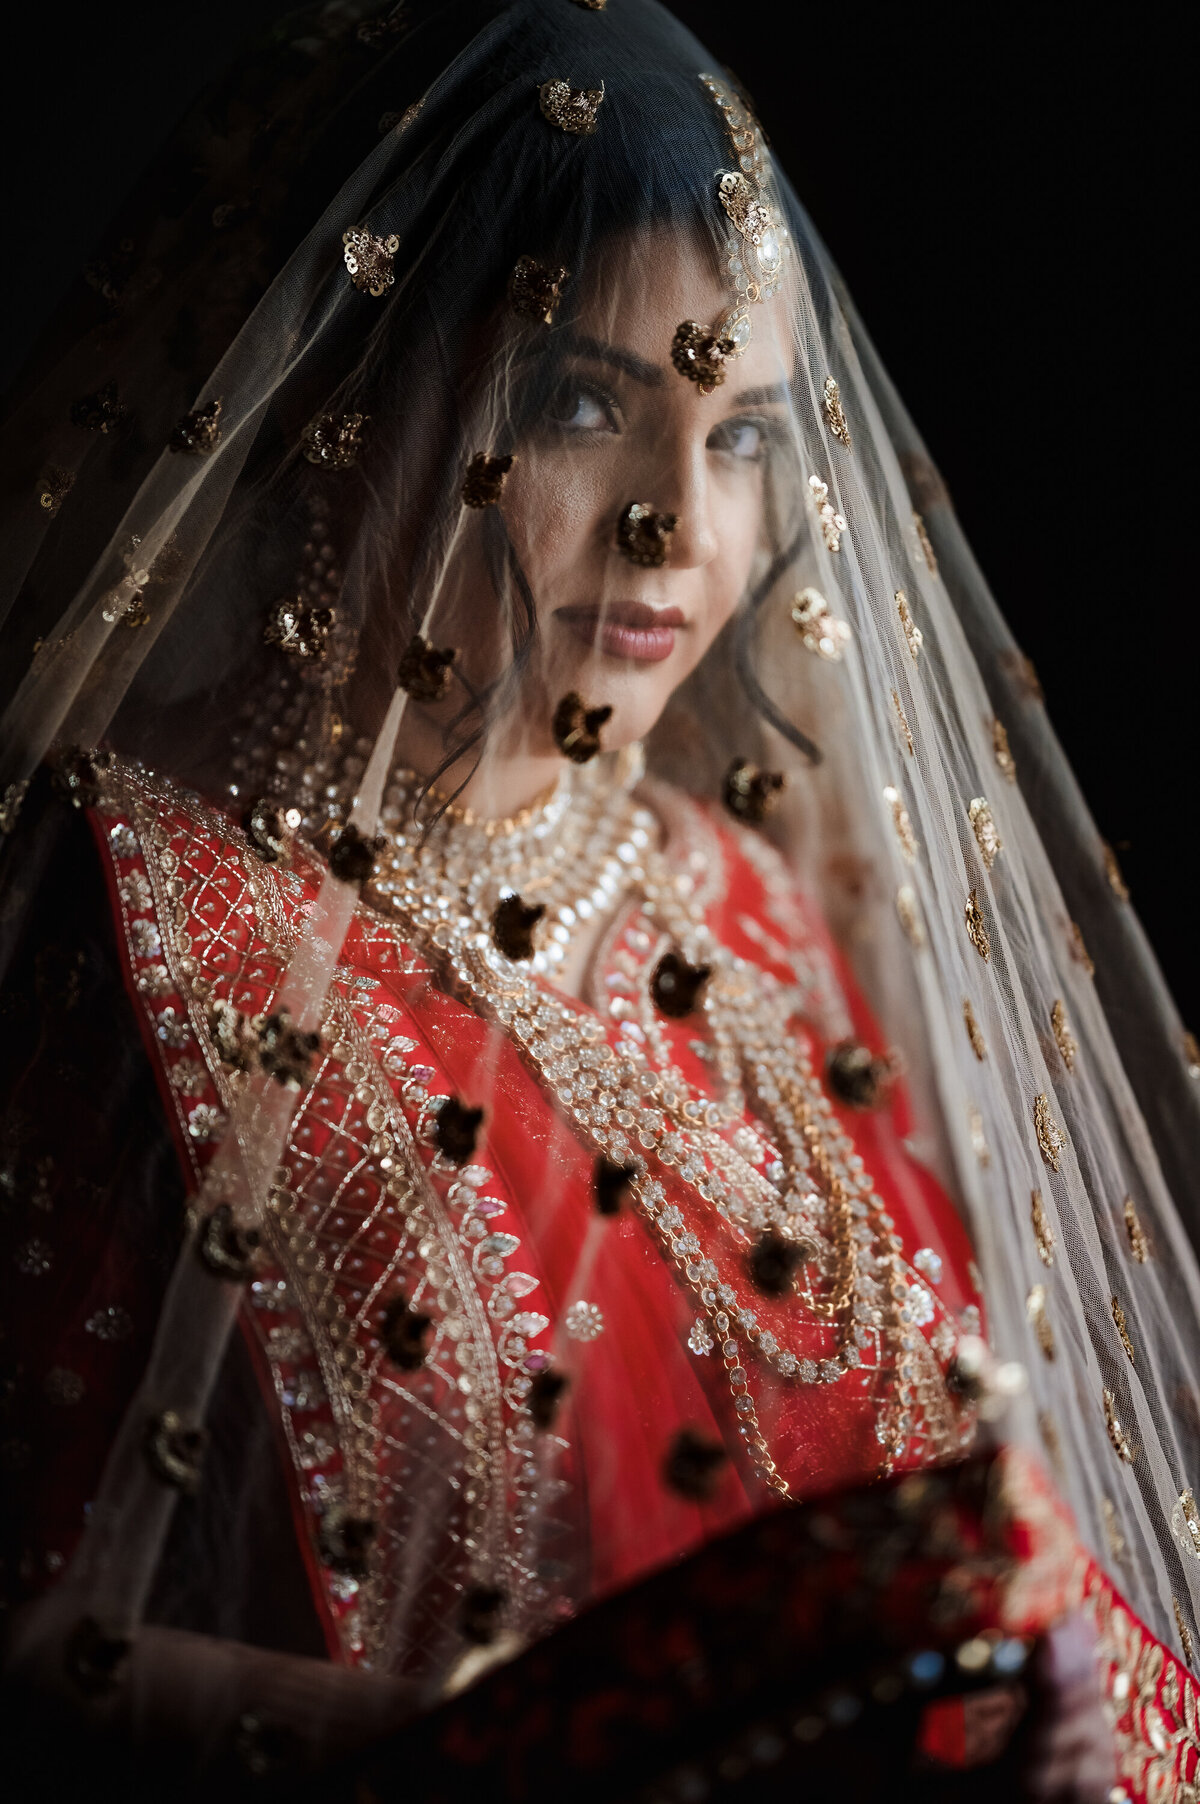 Ishan Fotografi is rated NYC's premier Indian wedding photography specialist.